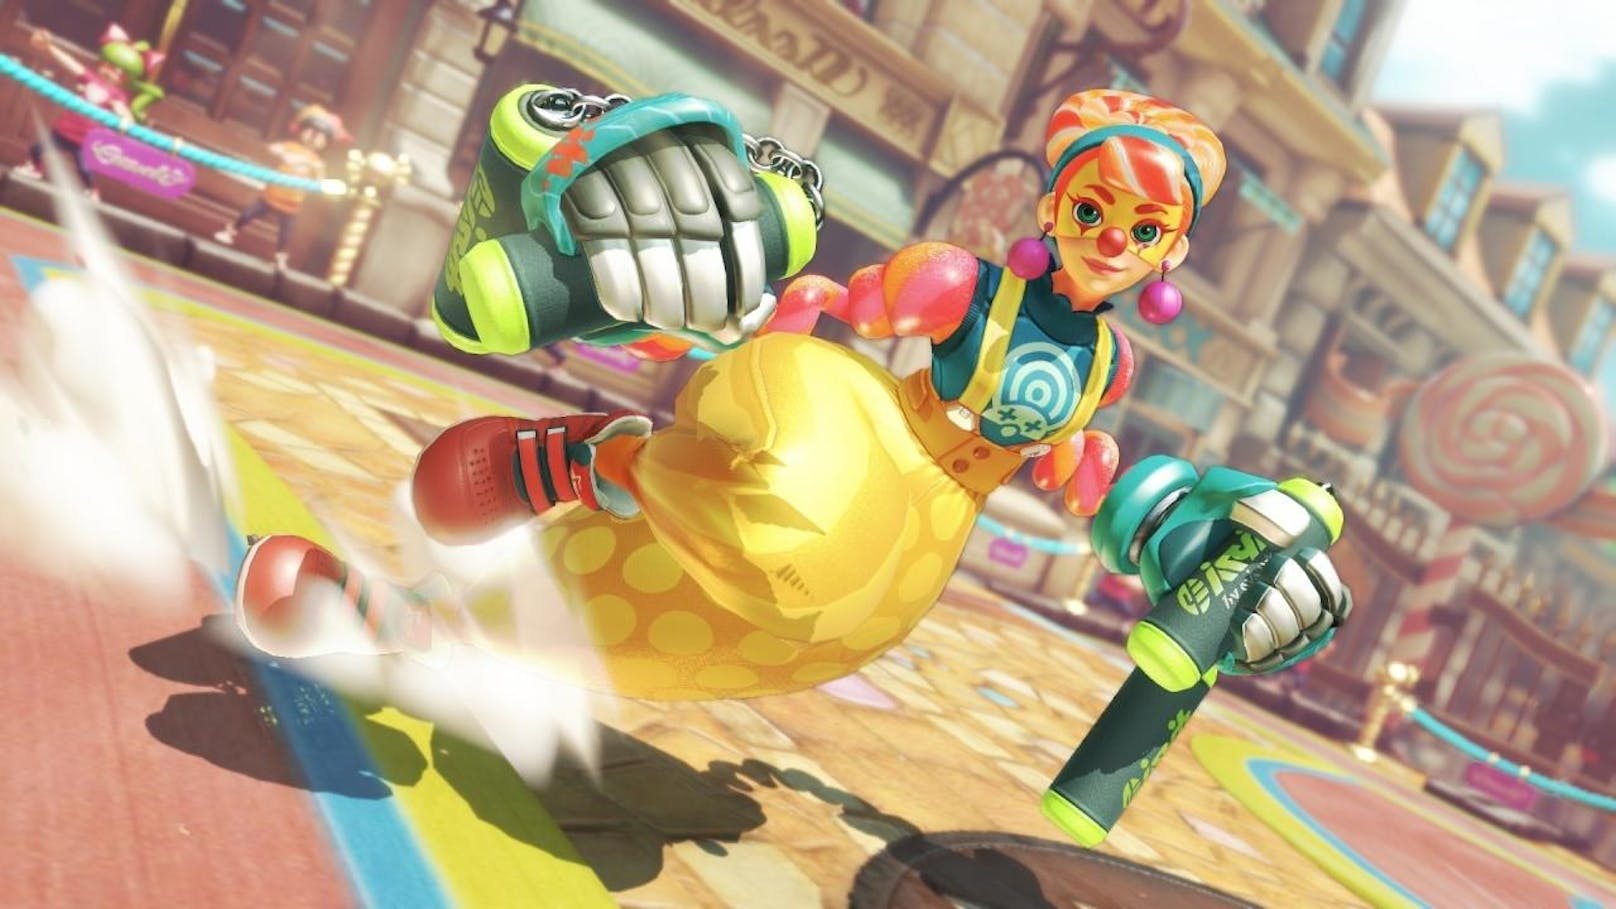  <a href="https://www.heute.at/digital/games/story/ARMS-im-Test--Neuer-Stern-am-Multiplayer-Himmel-46167840" target="_blank">ARMS</a>